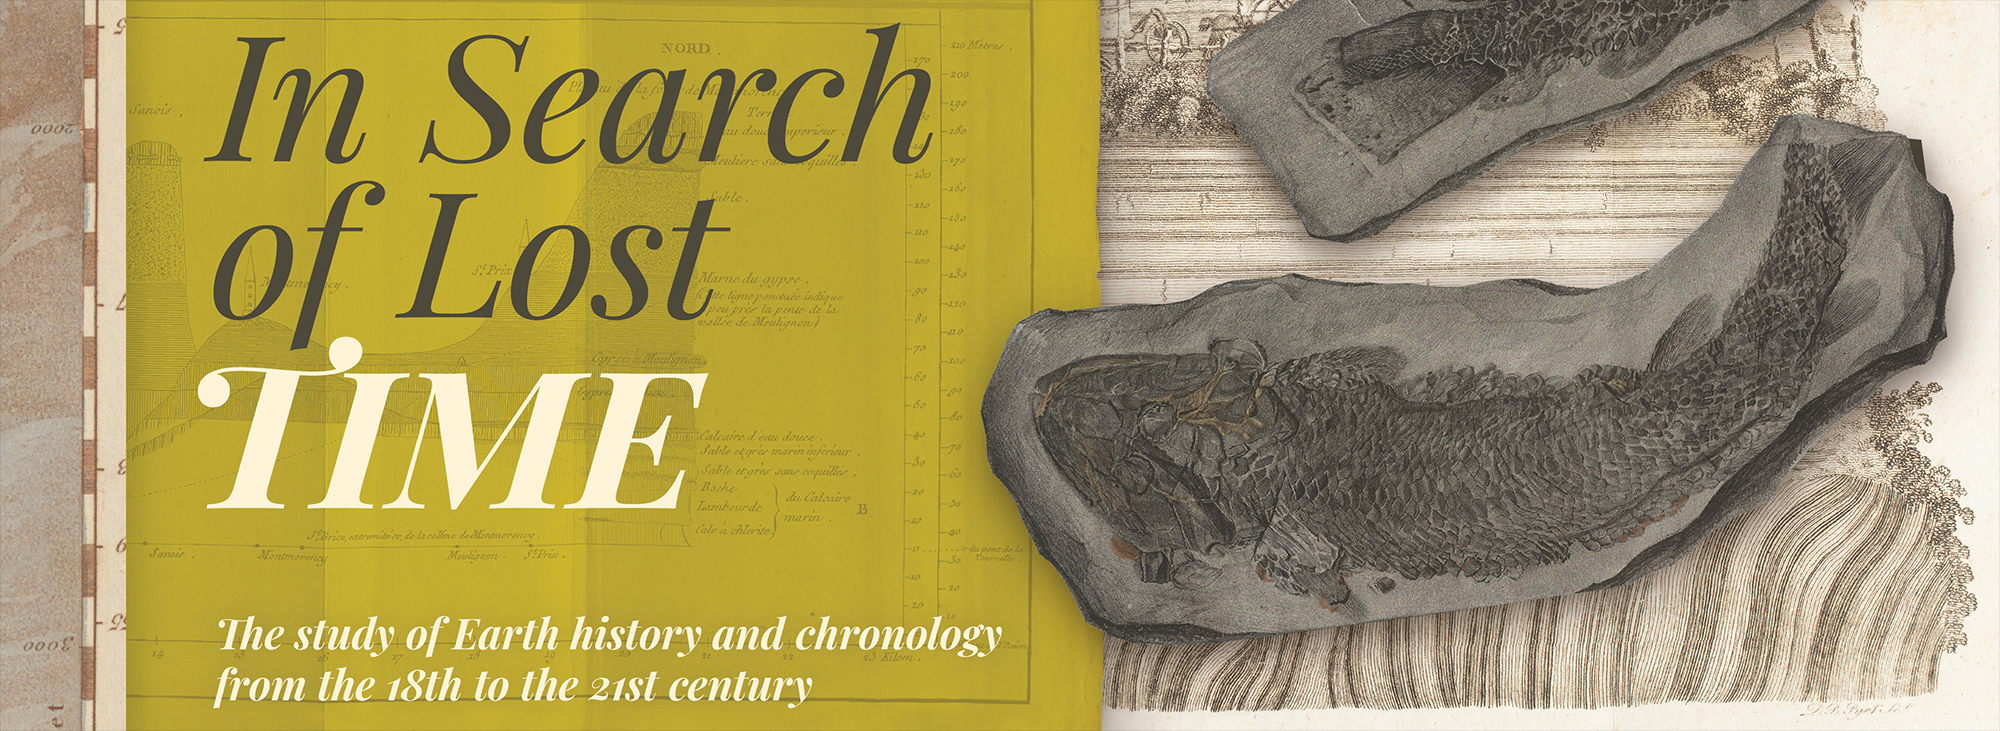 In Search of Lost Time: the study of Earth history and chronology from the 18th to the 21st century